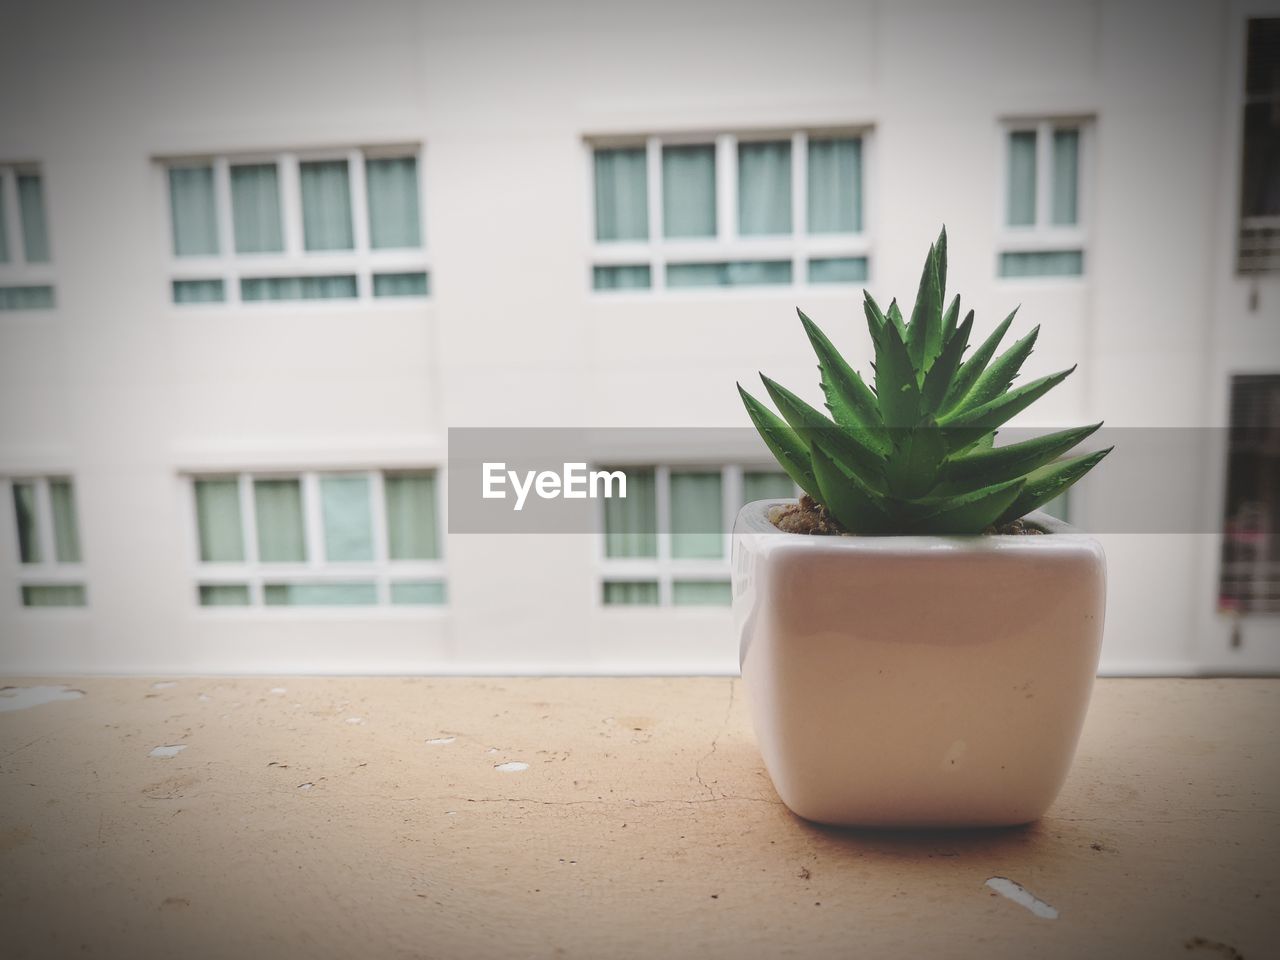 POTTED PLANT ON WINDOW SILL